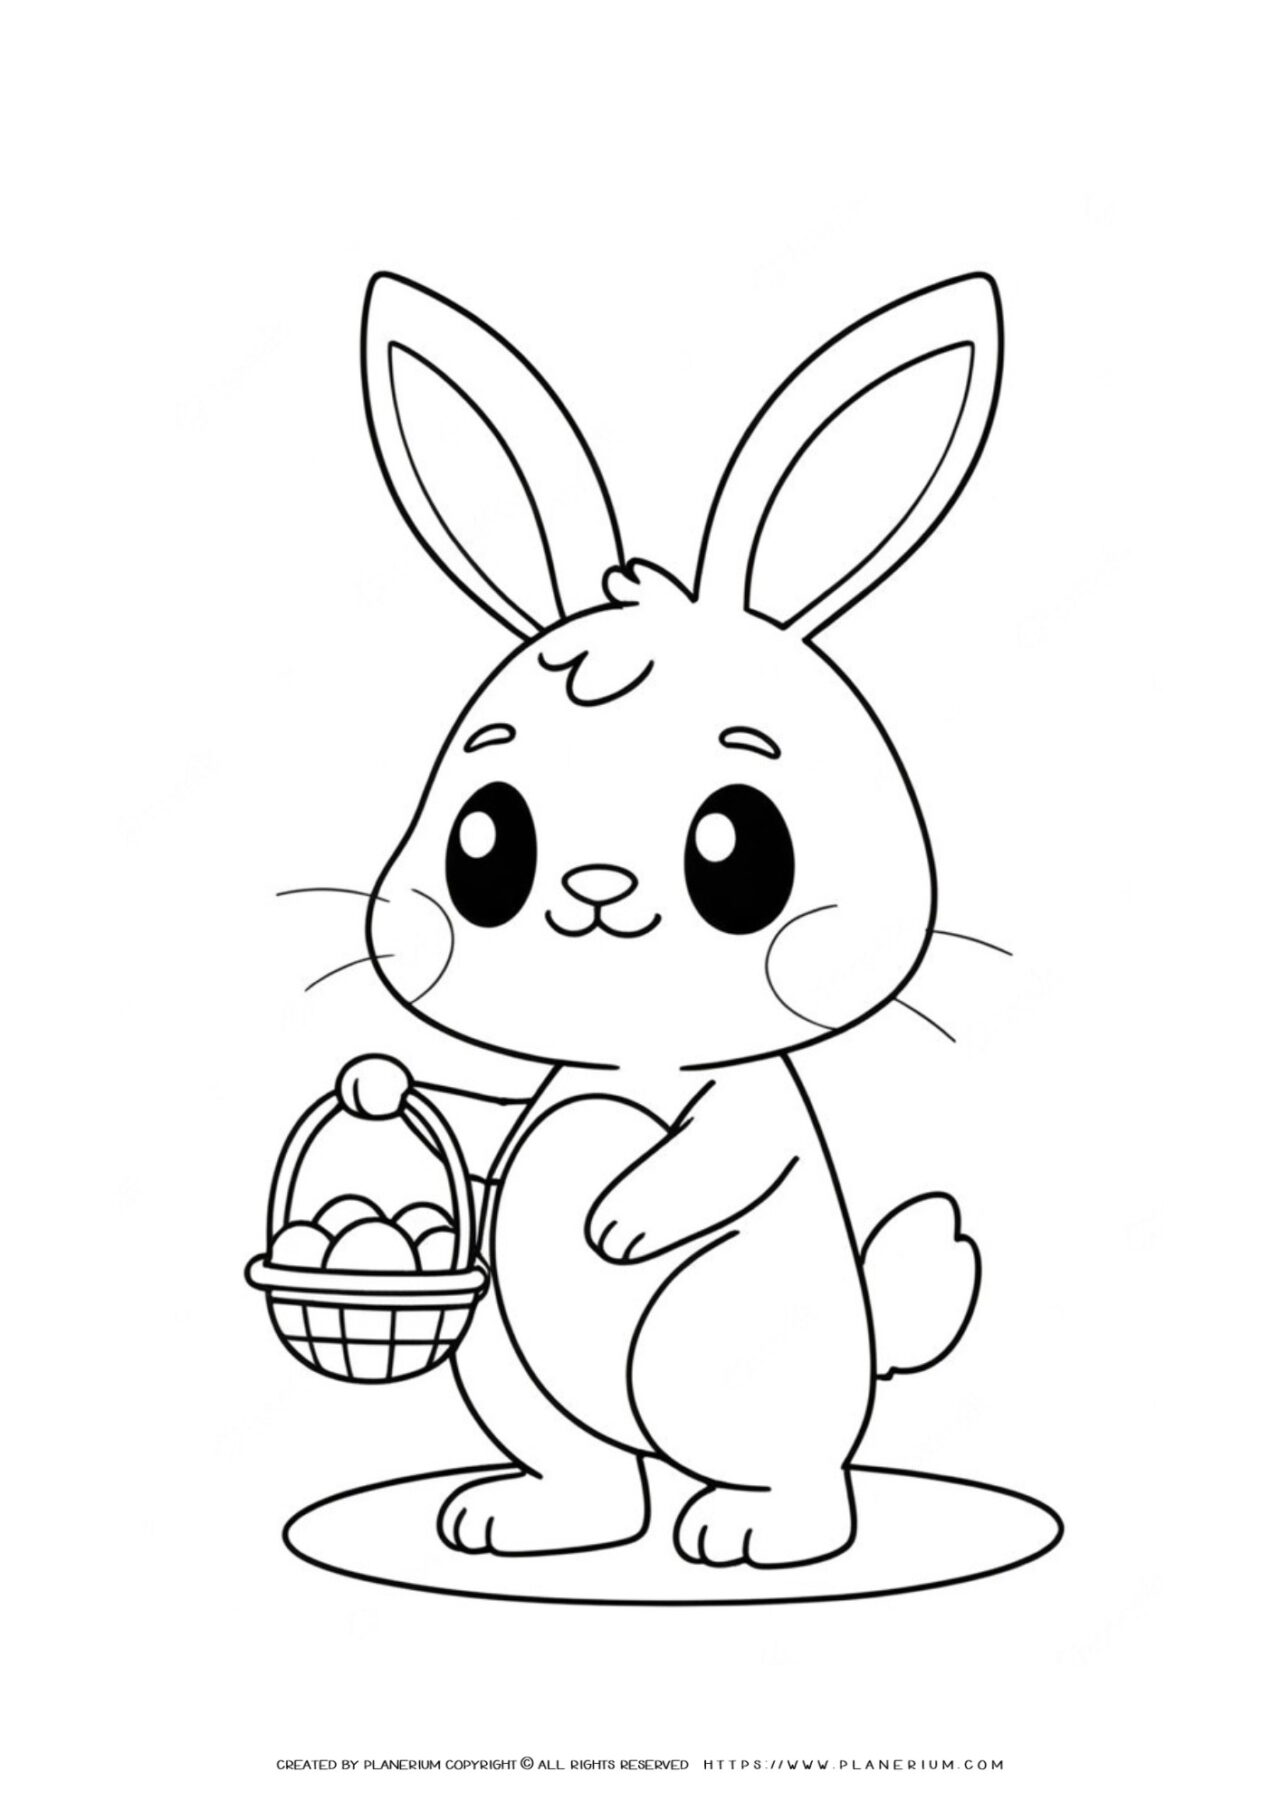 Cartoon bunny with Easter eggs coloring page.